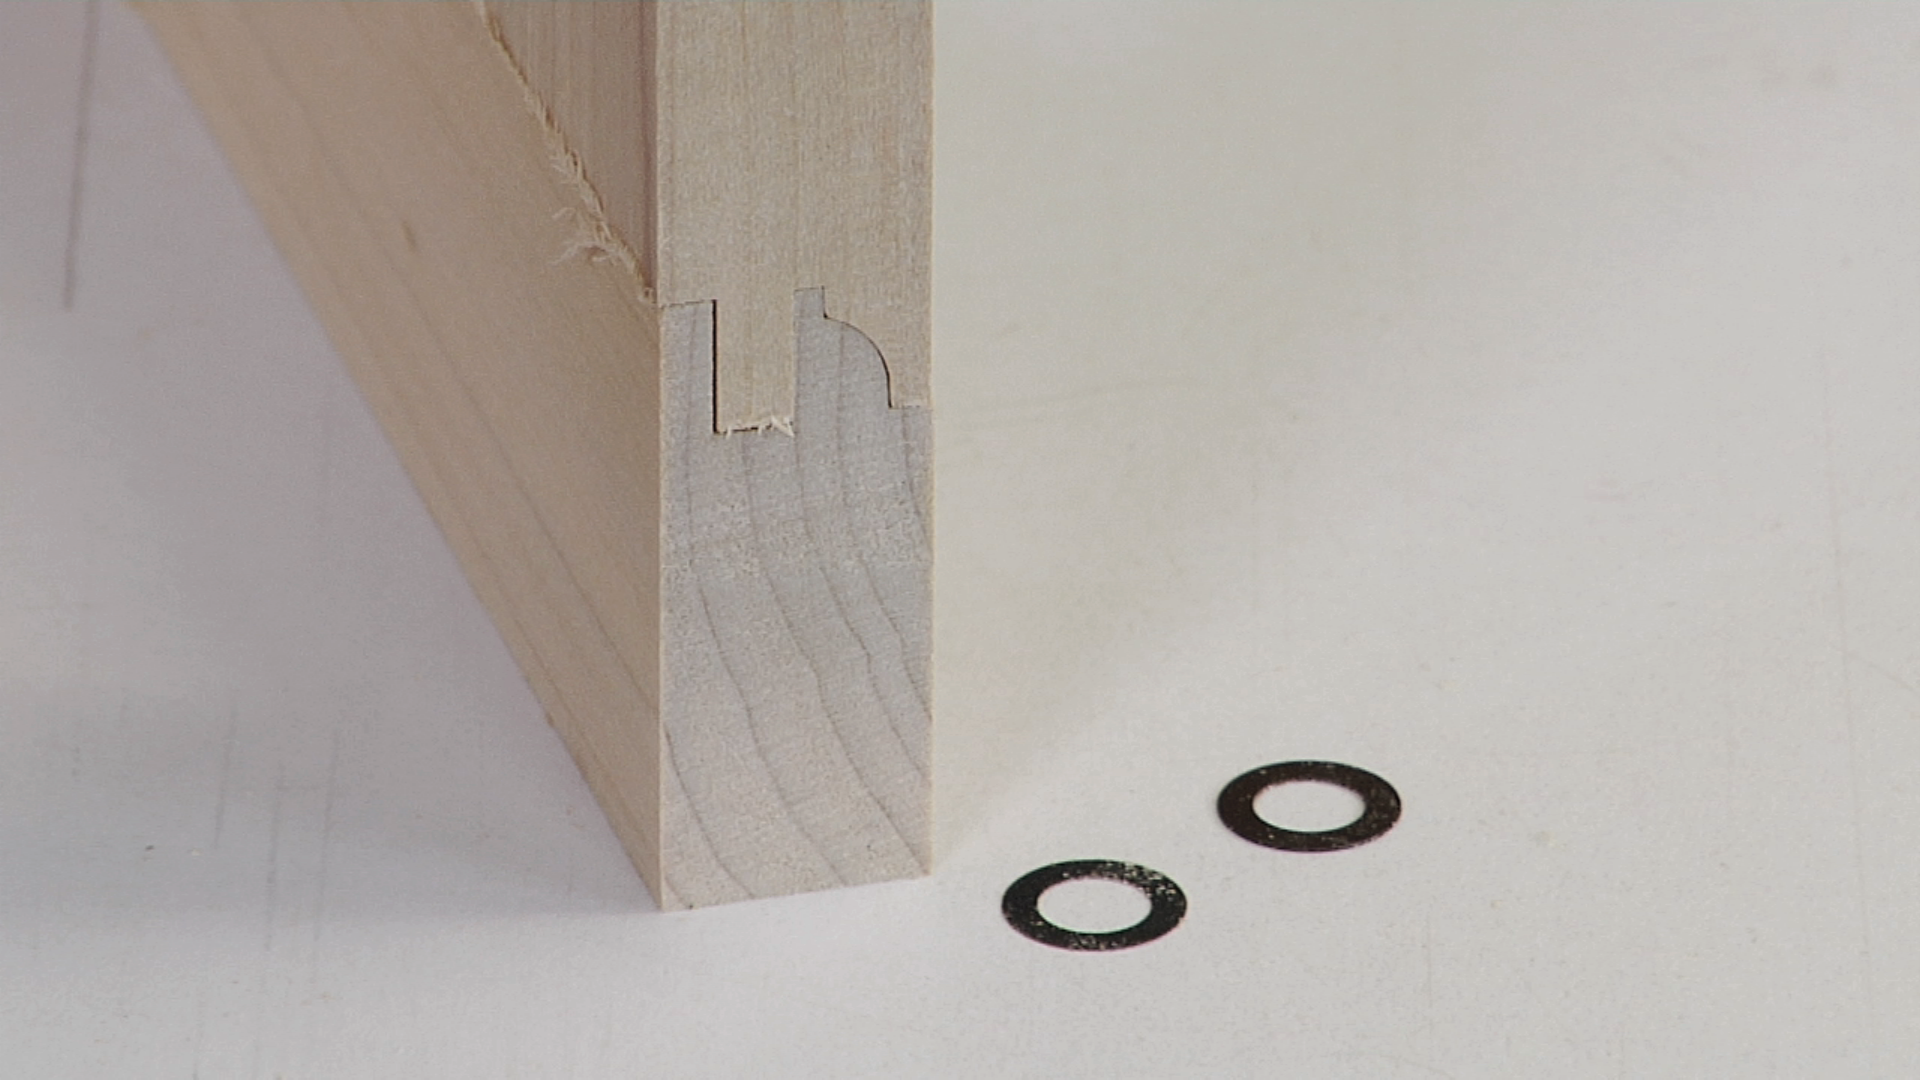 Tweaking Rail and Stile Router Bits product featured image thumbnail.